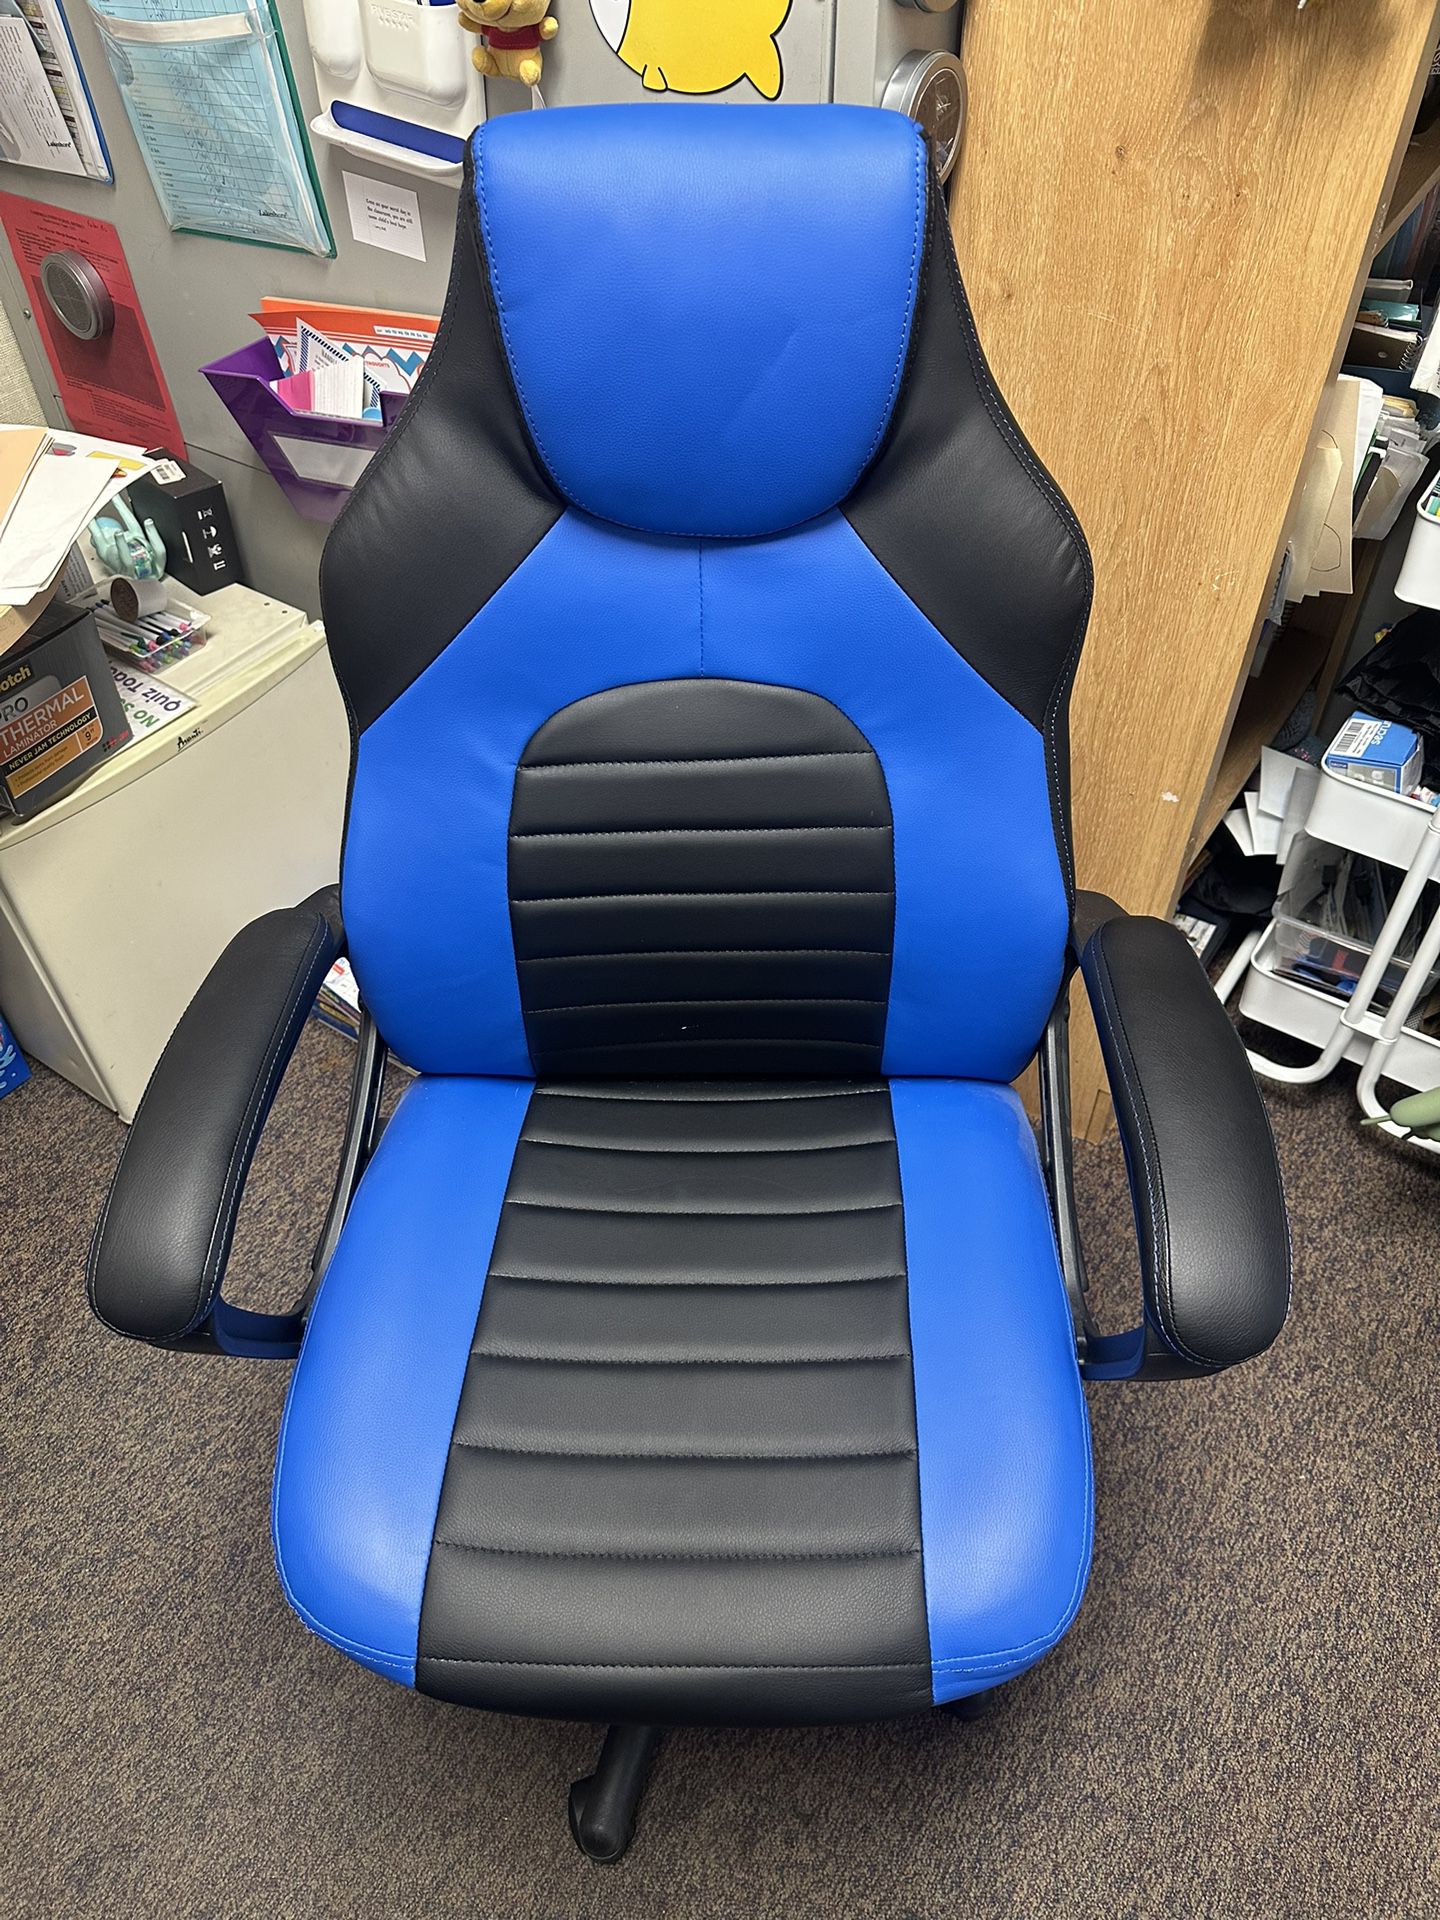 Blue and Black gaming/office chair